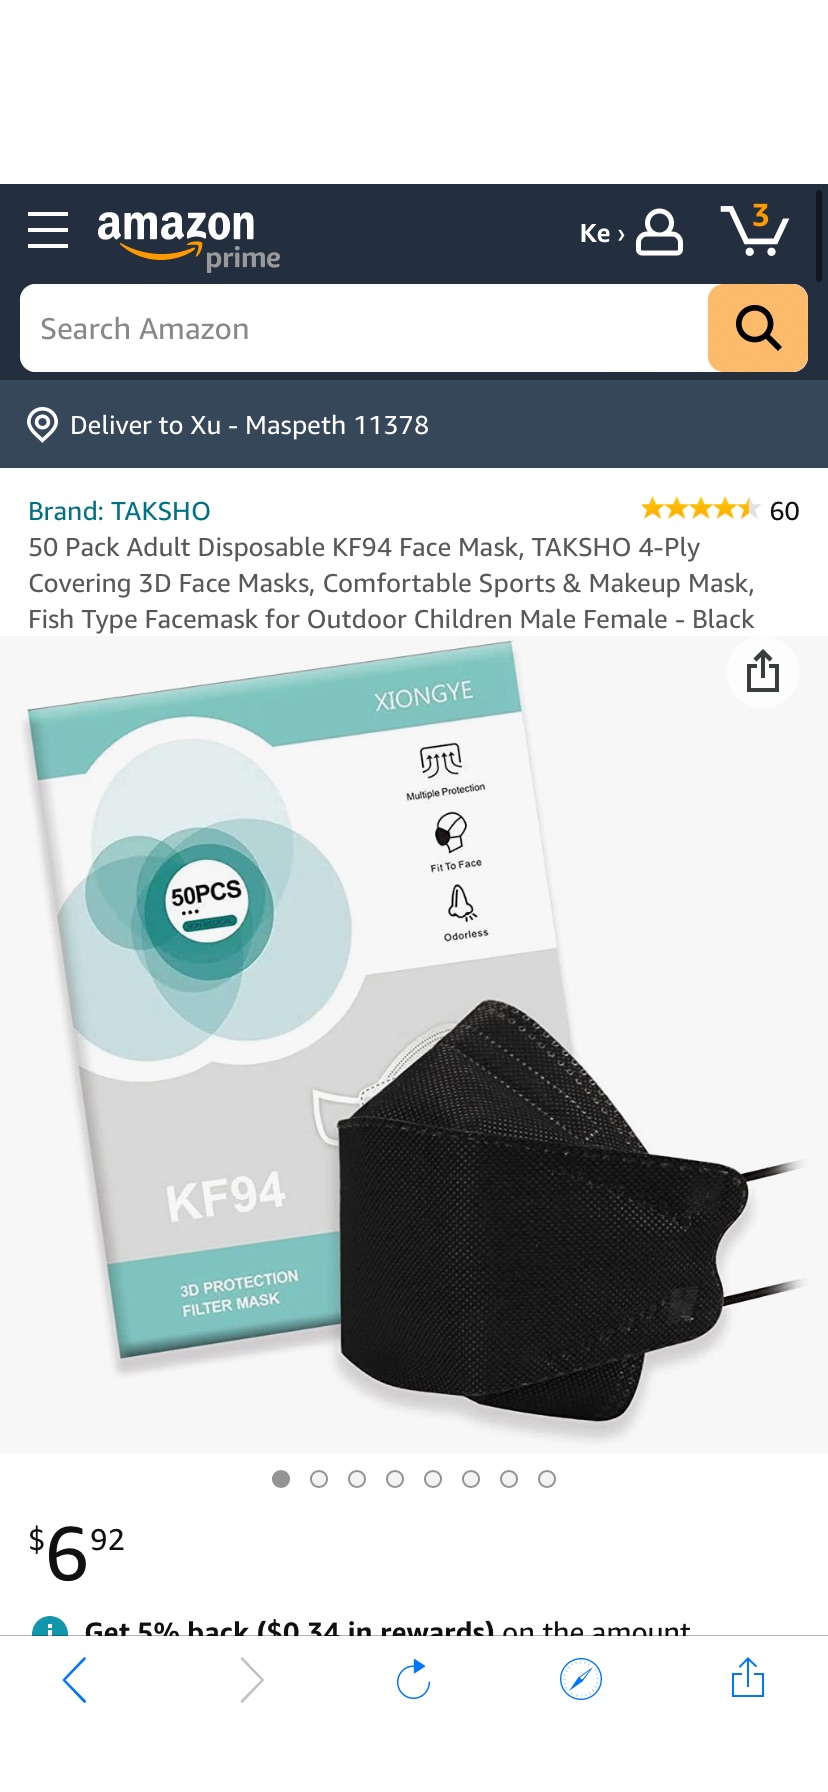 50 Pack Adult Disposable KF94 Face Mask, TAKSHO 4-Ply Covering 3D Face Masks, Comfortable Sports & Makeup Mask, Fish Type Facemask for Outdoor Children Male Female - Black: Amazon.com: KF94口罩50个装